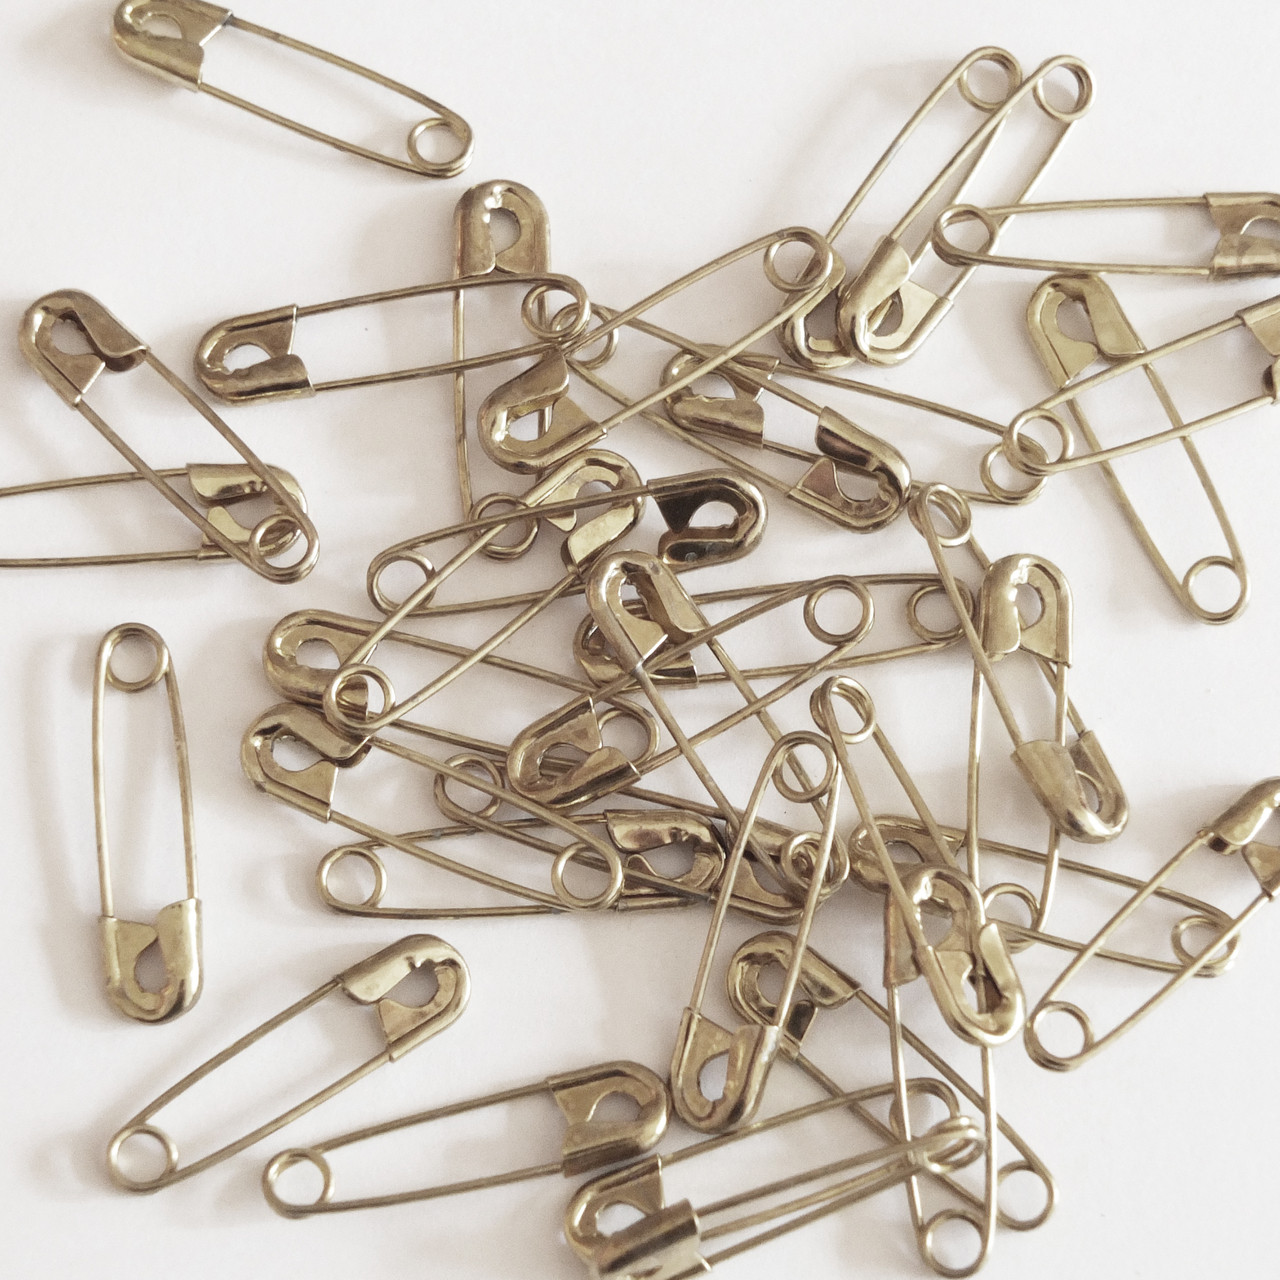 Italian Silver Metal Safety Pin - 3.75 - Safety Pins - Pins & Needles -  Notions